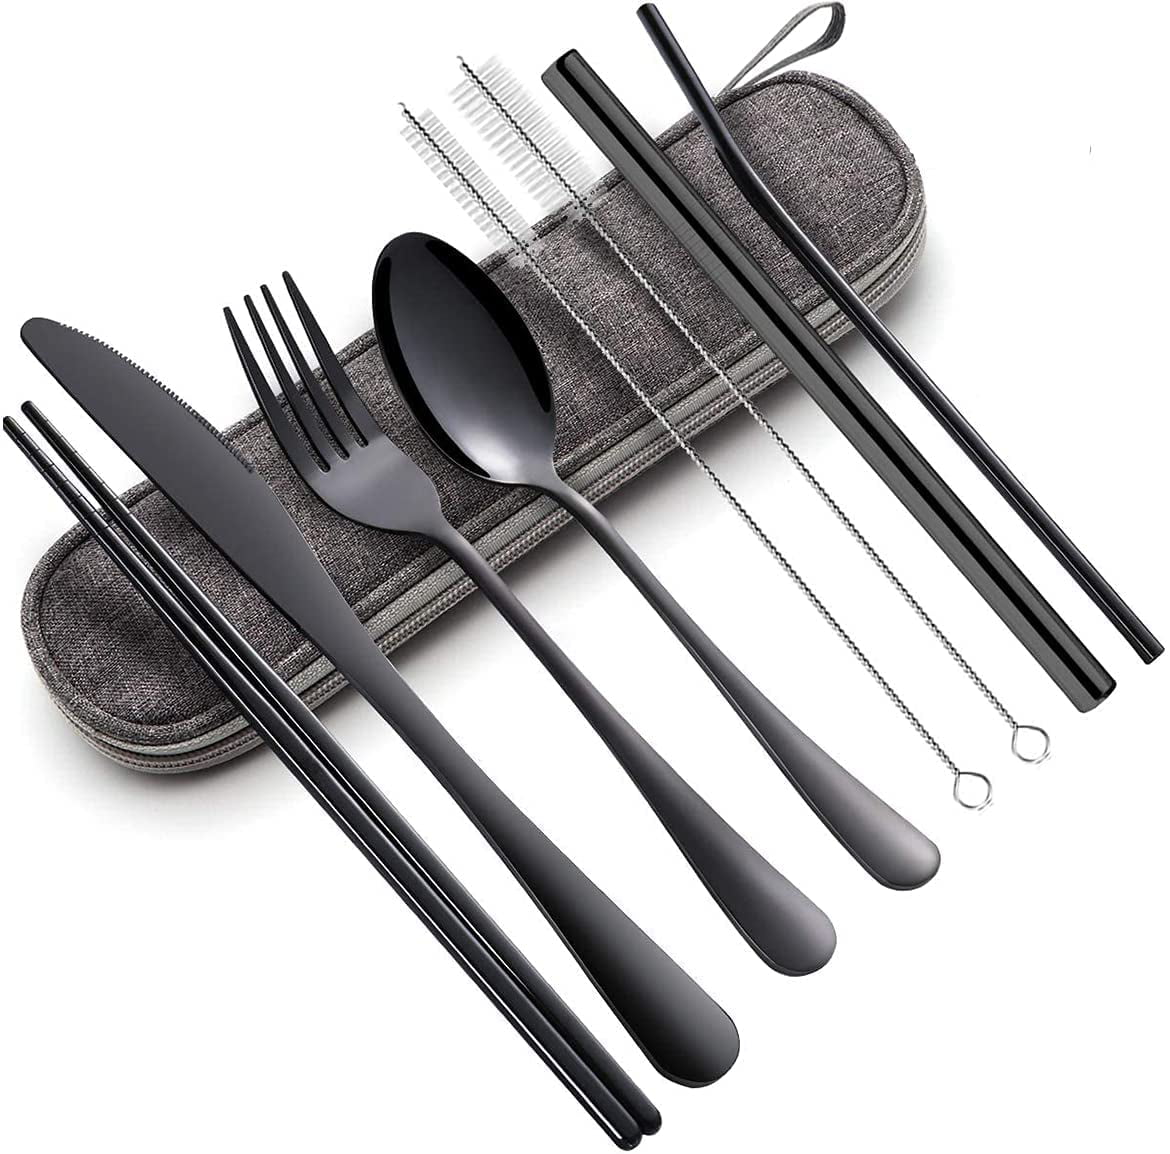 Black Portable Flatware Cutlery Set with Case,Stainless steel Travel Utensil set 8 Piece Travel Utensils Silverware with Case Camping Cutlery set,Chopsticks and Straw for Camping